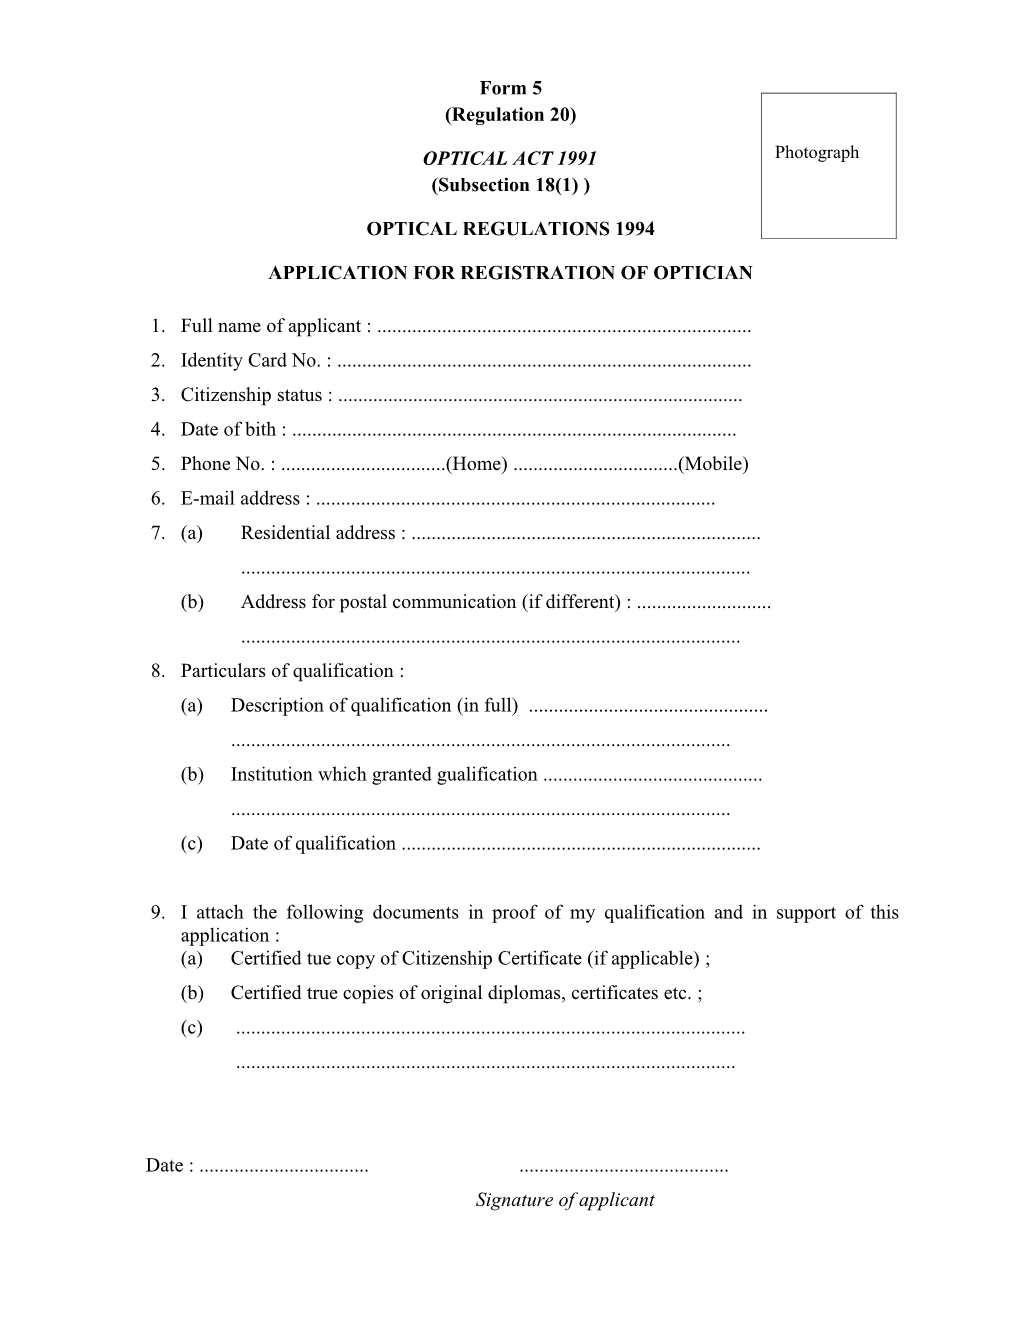 Application for Registration of Optician